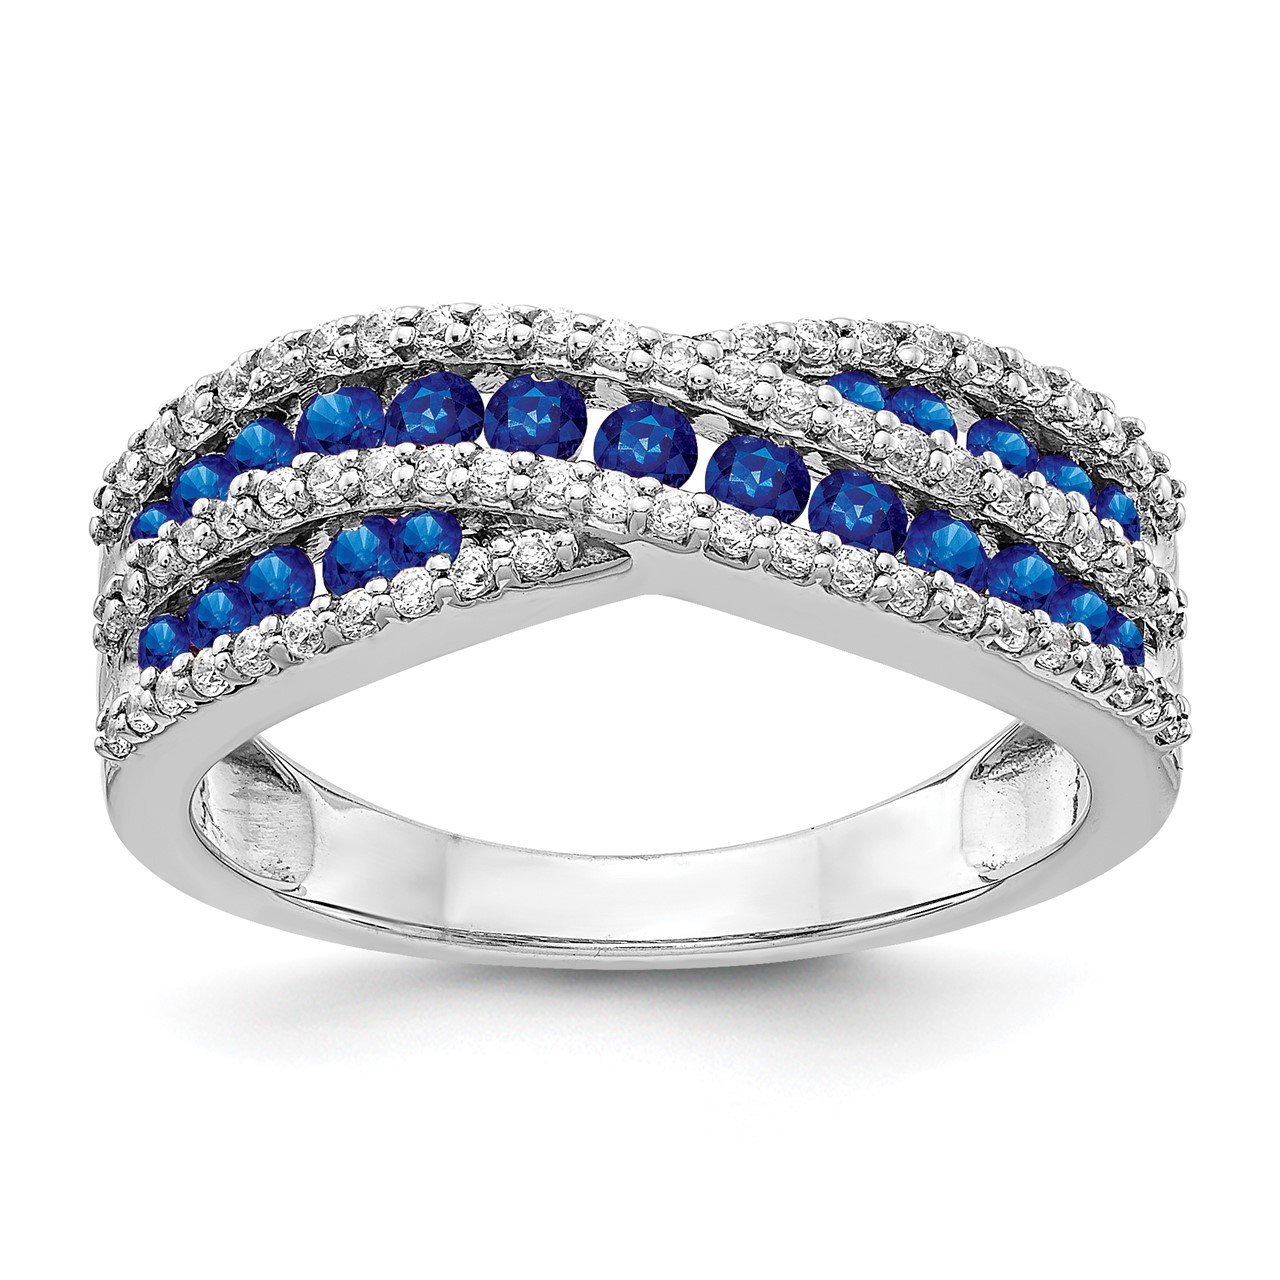 14k White Gold Diamond and Sapphire Fancy Ring